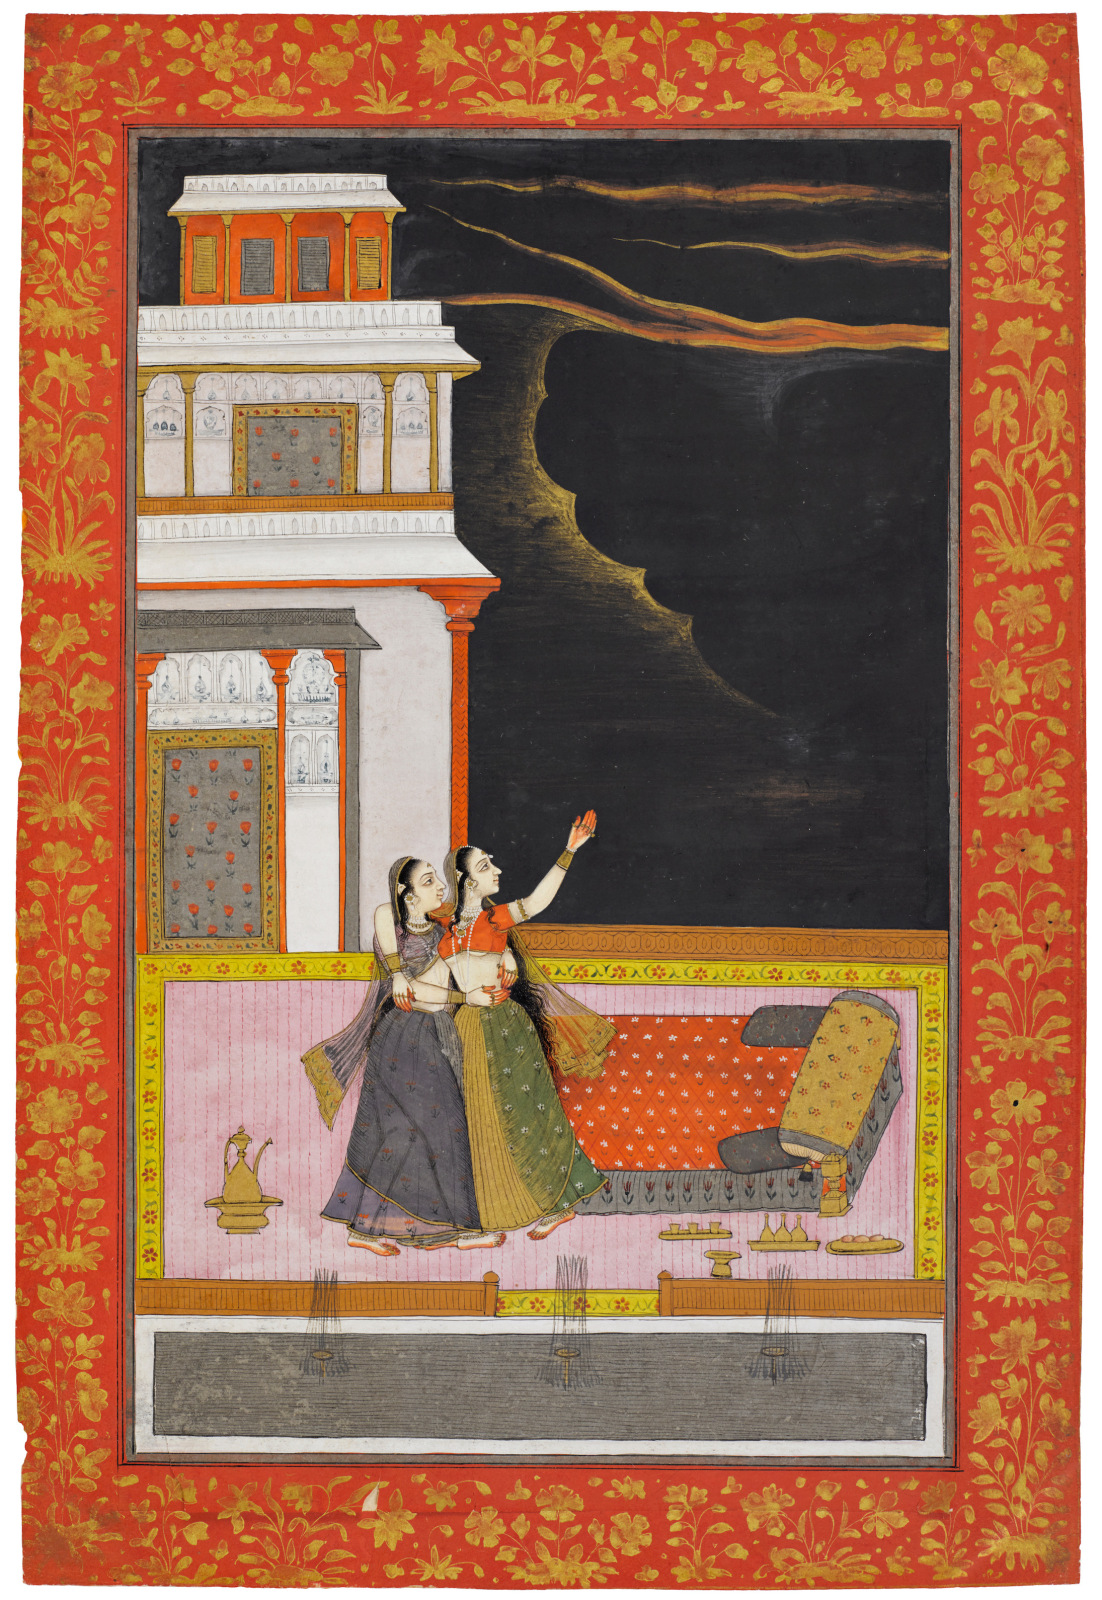 PAGE FROM A RAGAMALA SERIES 